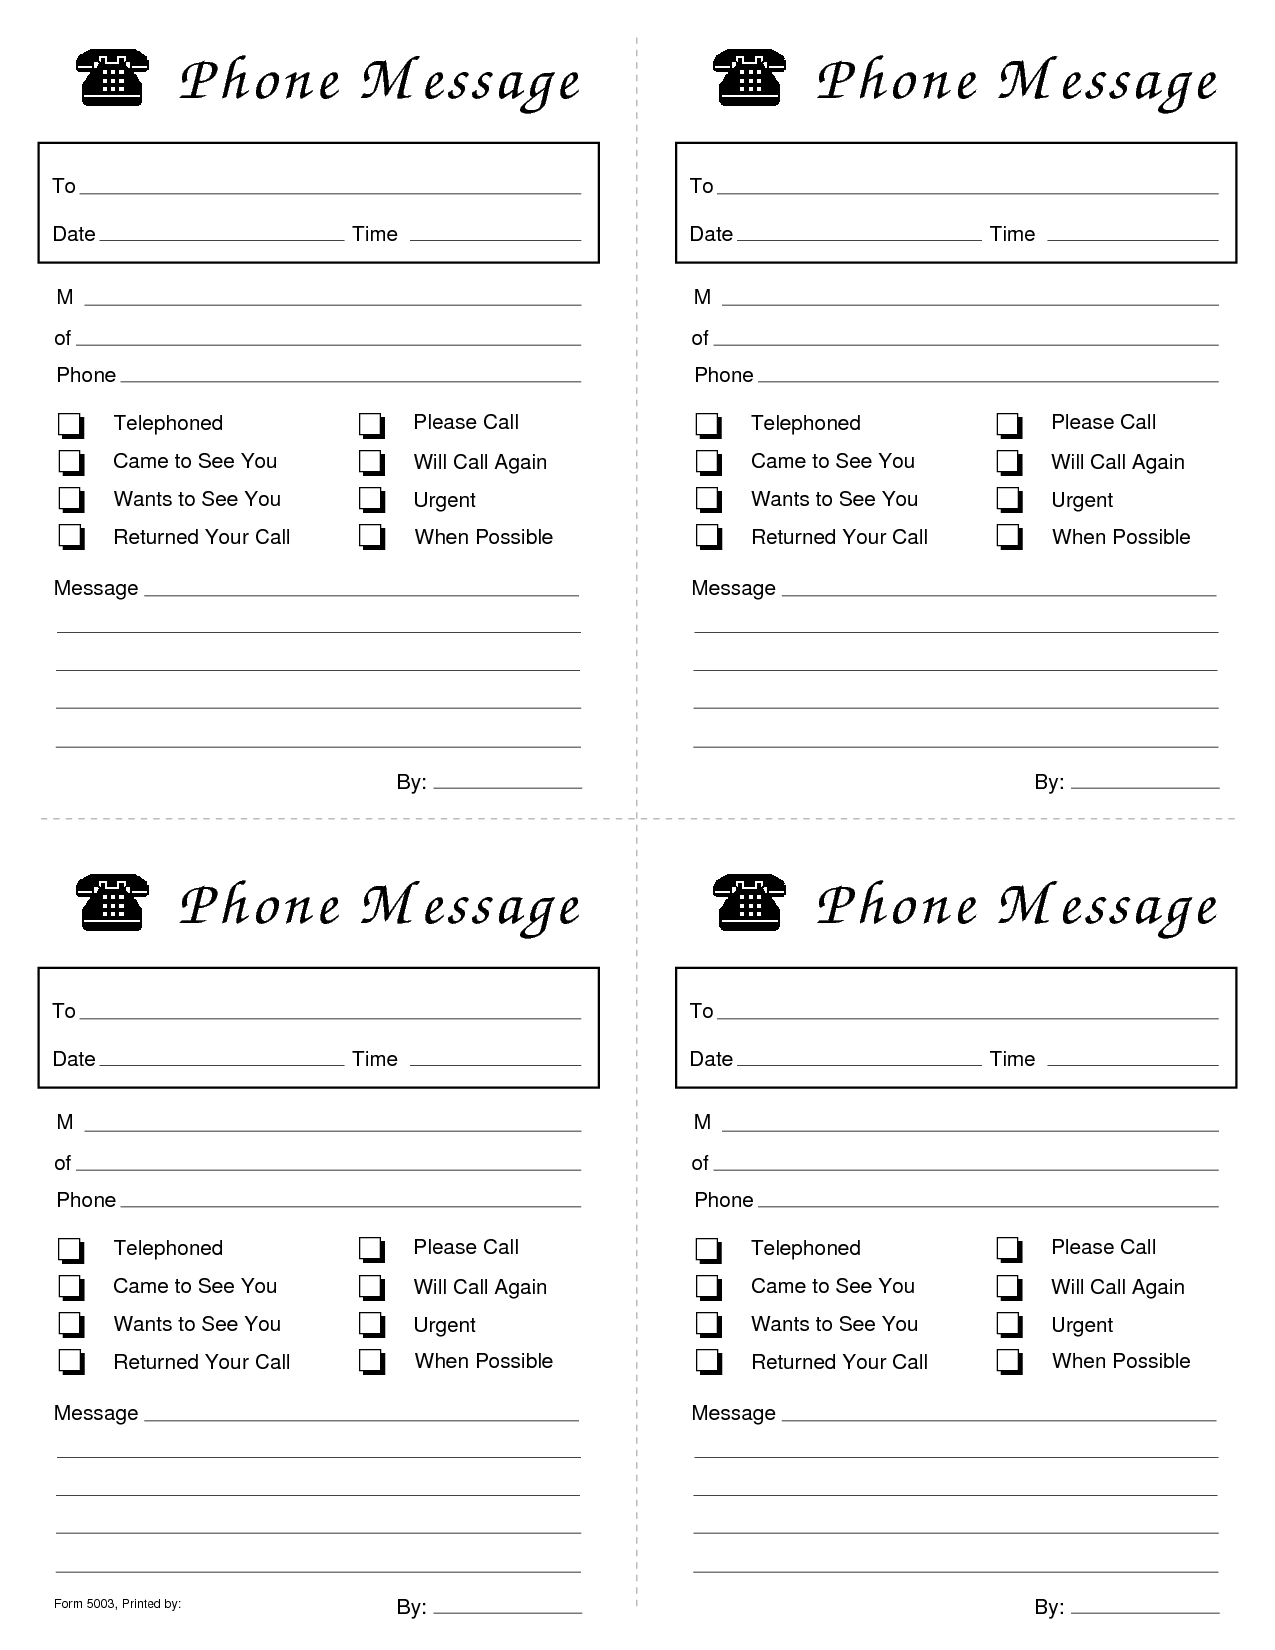 Printable+Phone+Message+Template | ??s | Phone Messages, Free Phones - Free Printable Phone Message Template